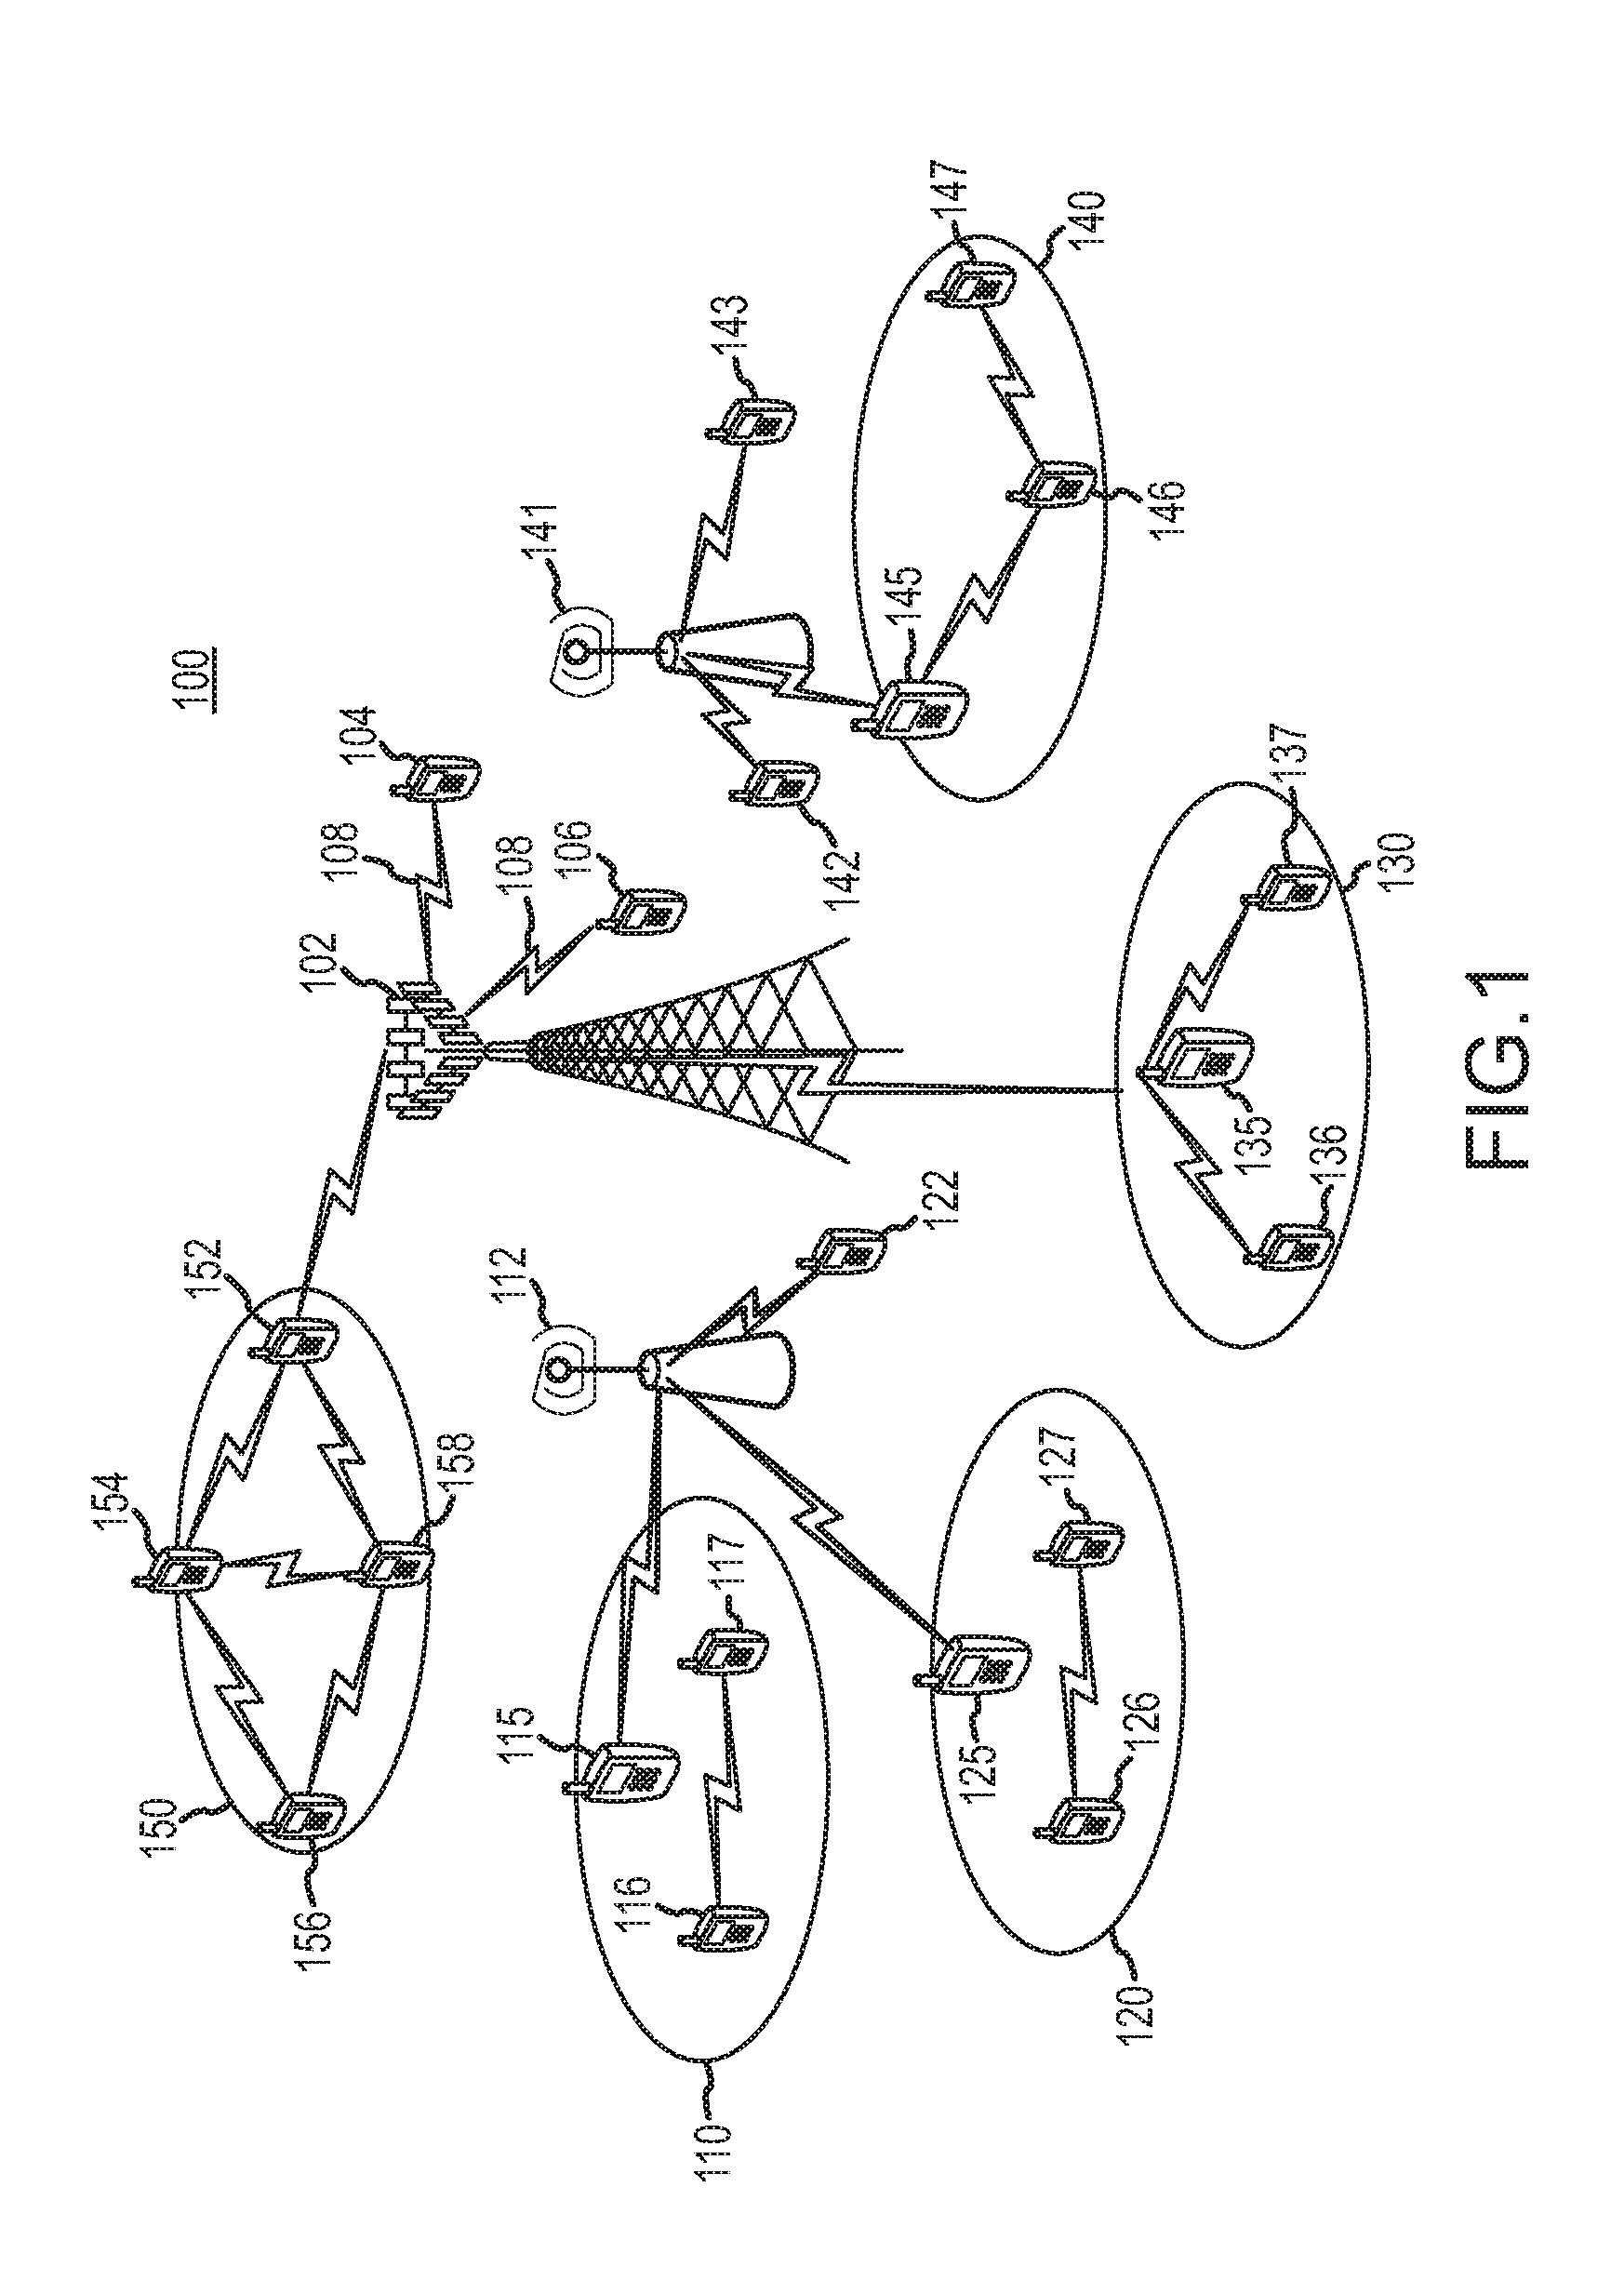 Apparatus and method to enable device-to-device (D2D) communication in cellular networks